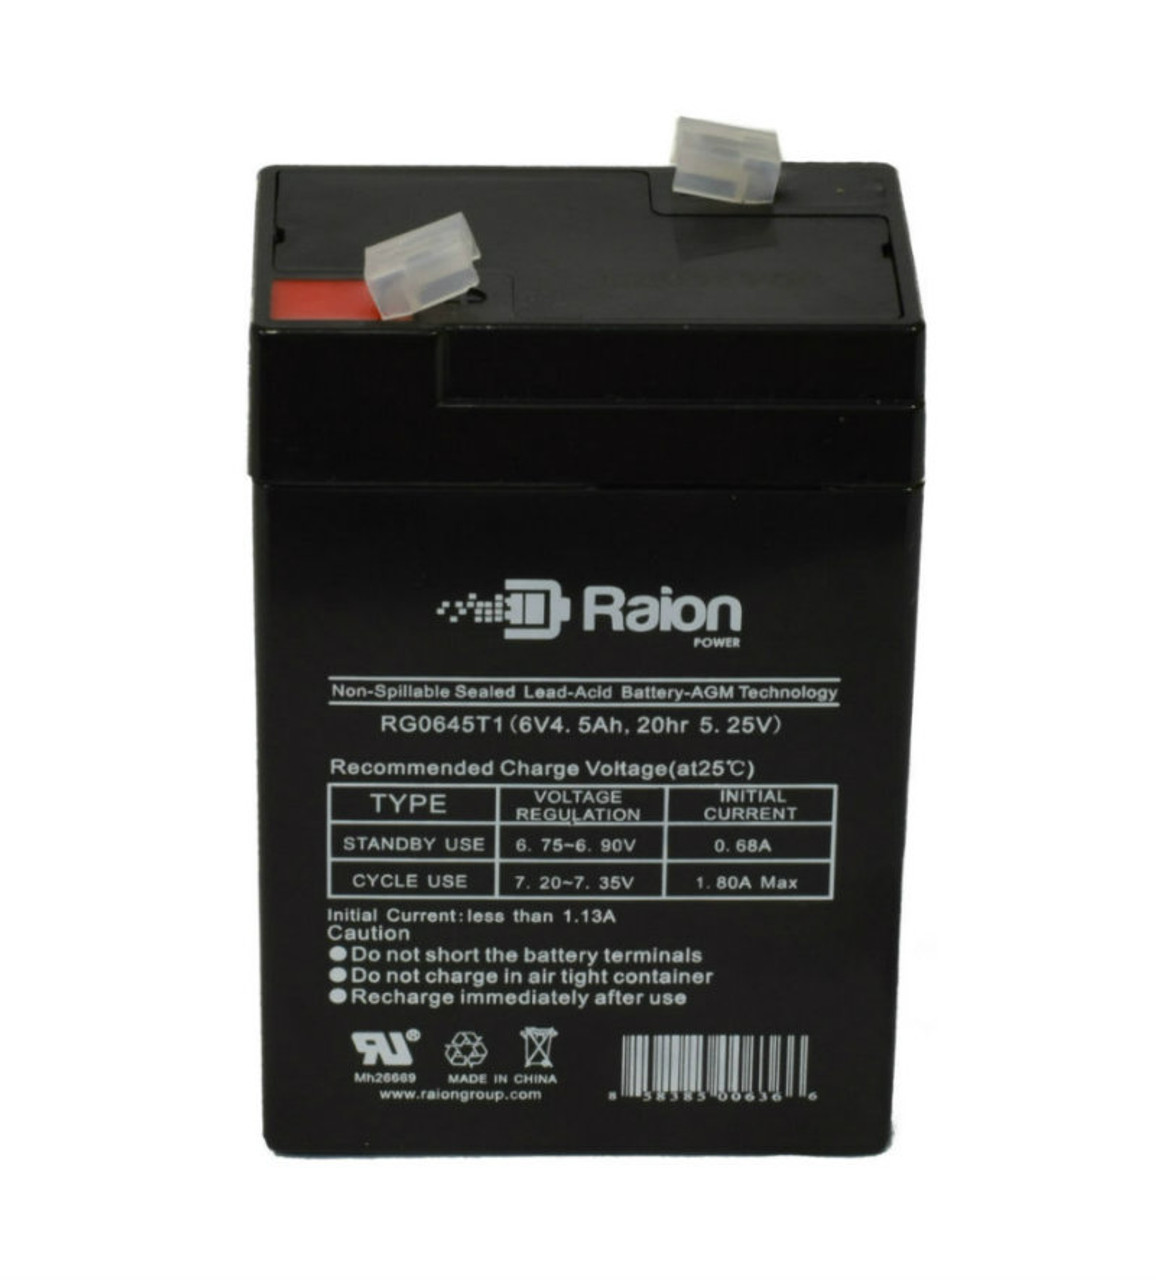 Raion Power RG0645T1 Replacement Battery Cartridge for Tysonic TY6-4.5